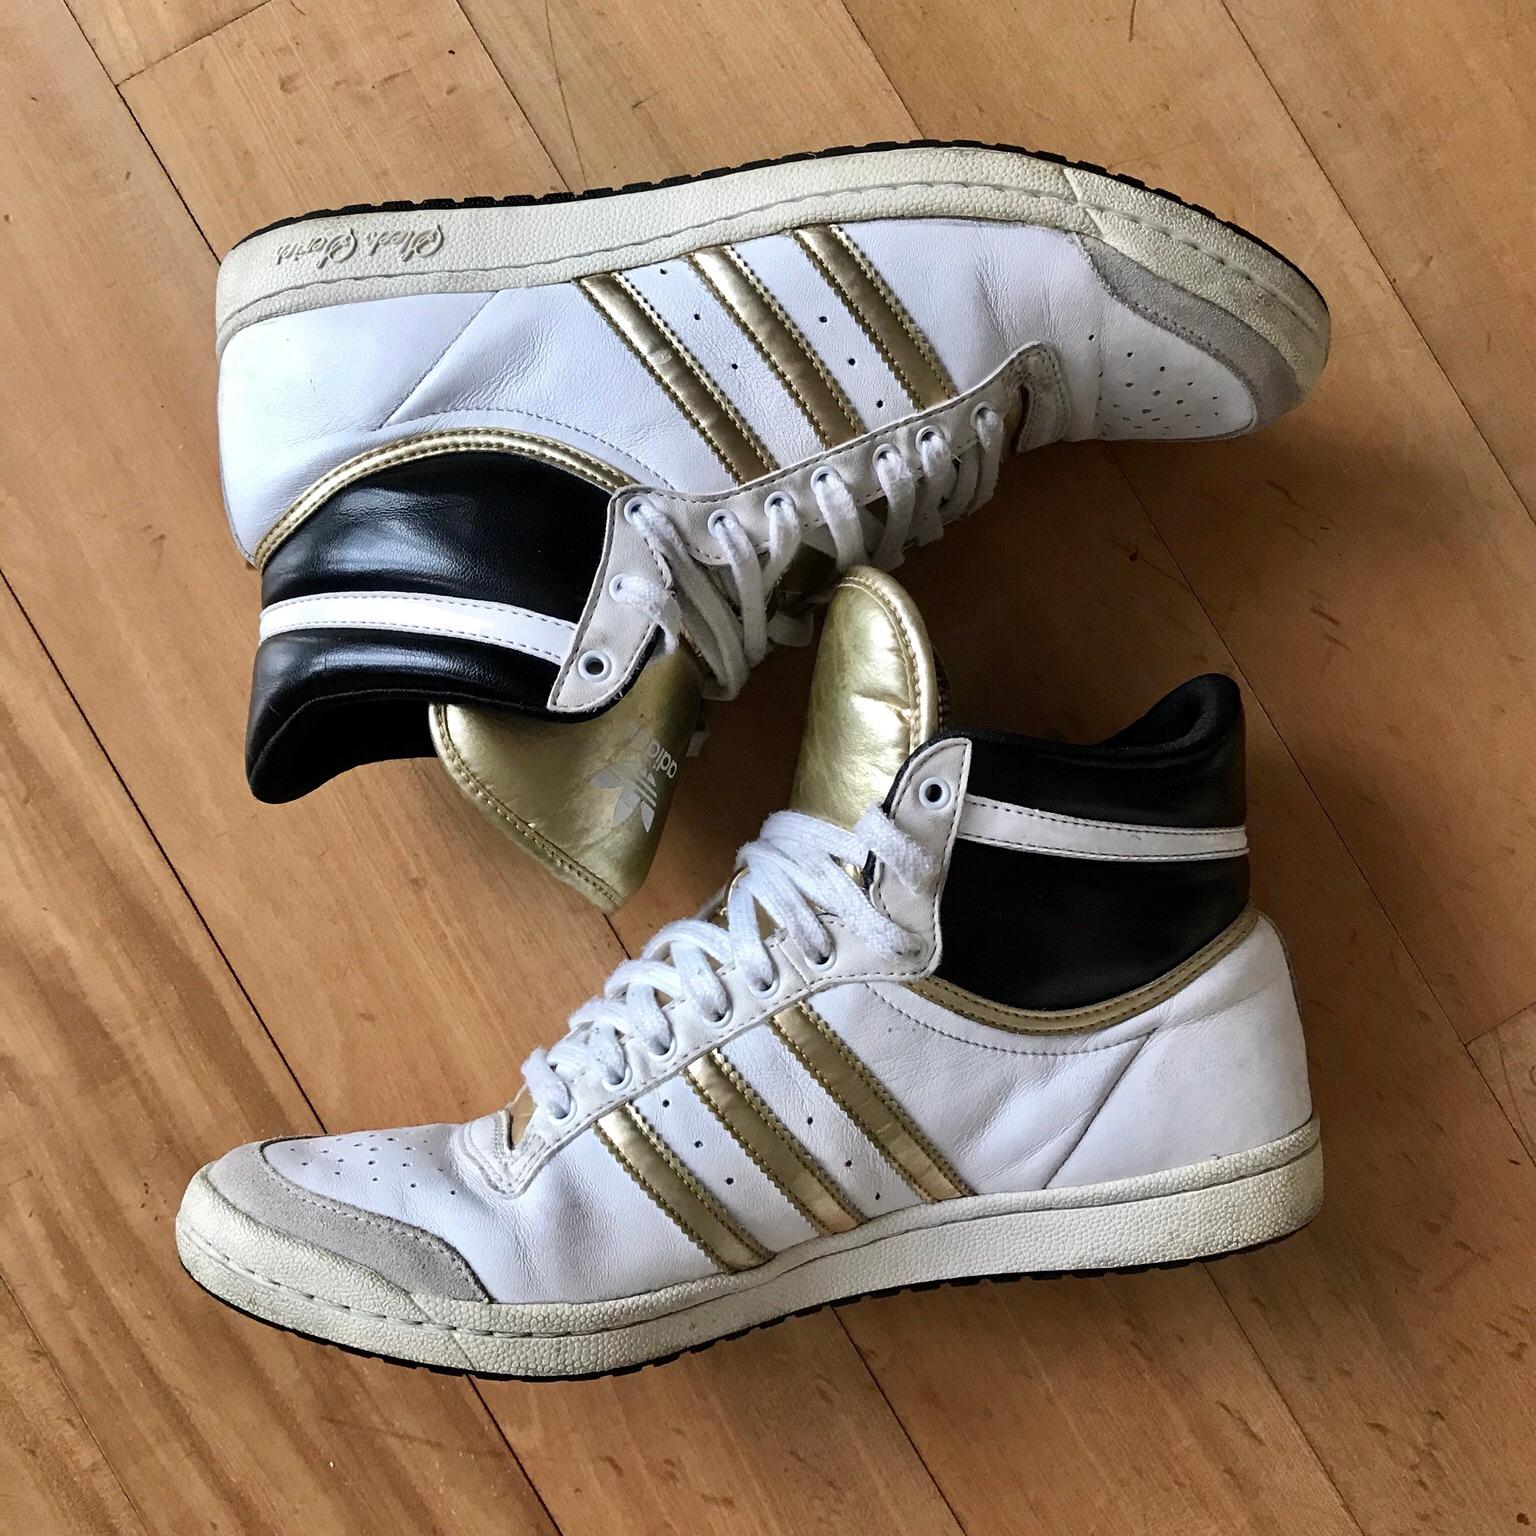 ADIDAS top ten bianche e oro in 40136 Bologna for €35.00 for sale | Shpock